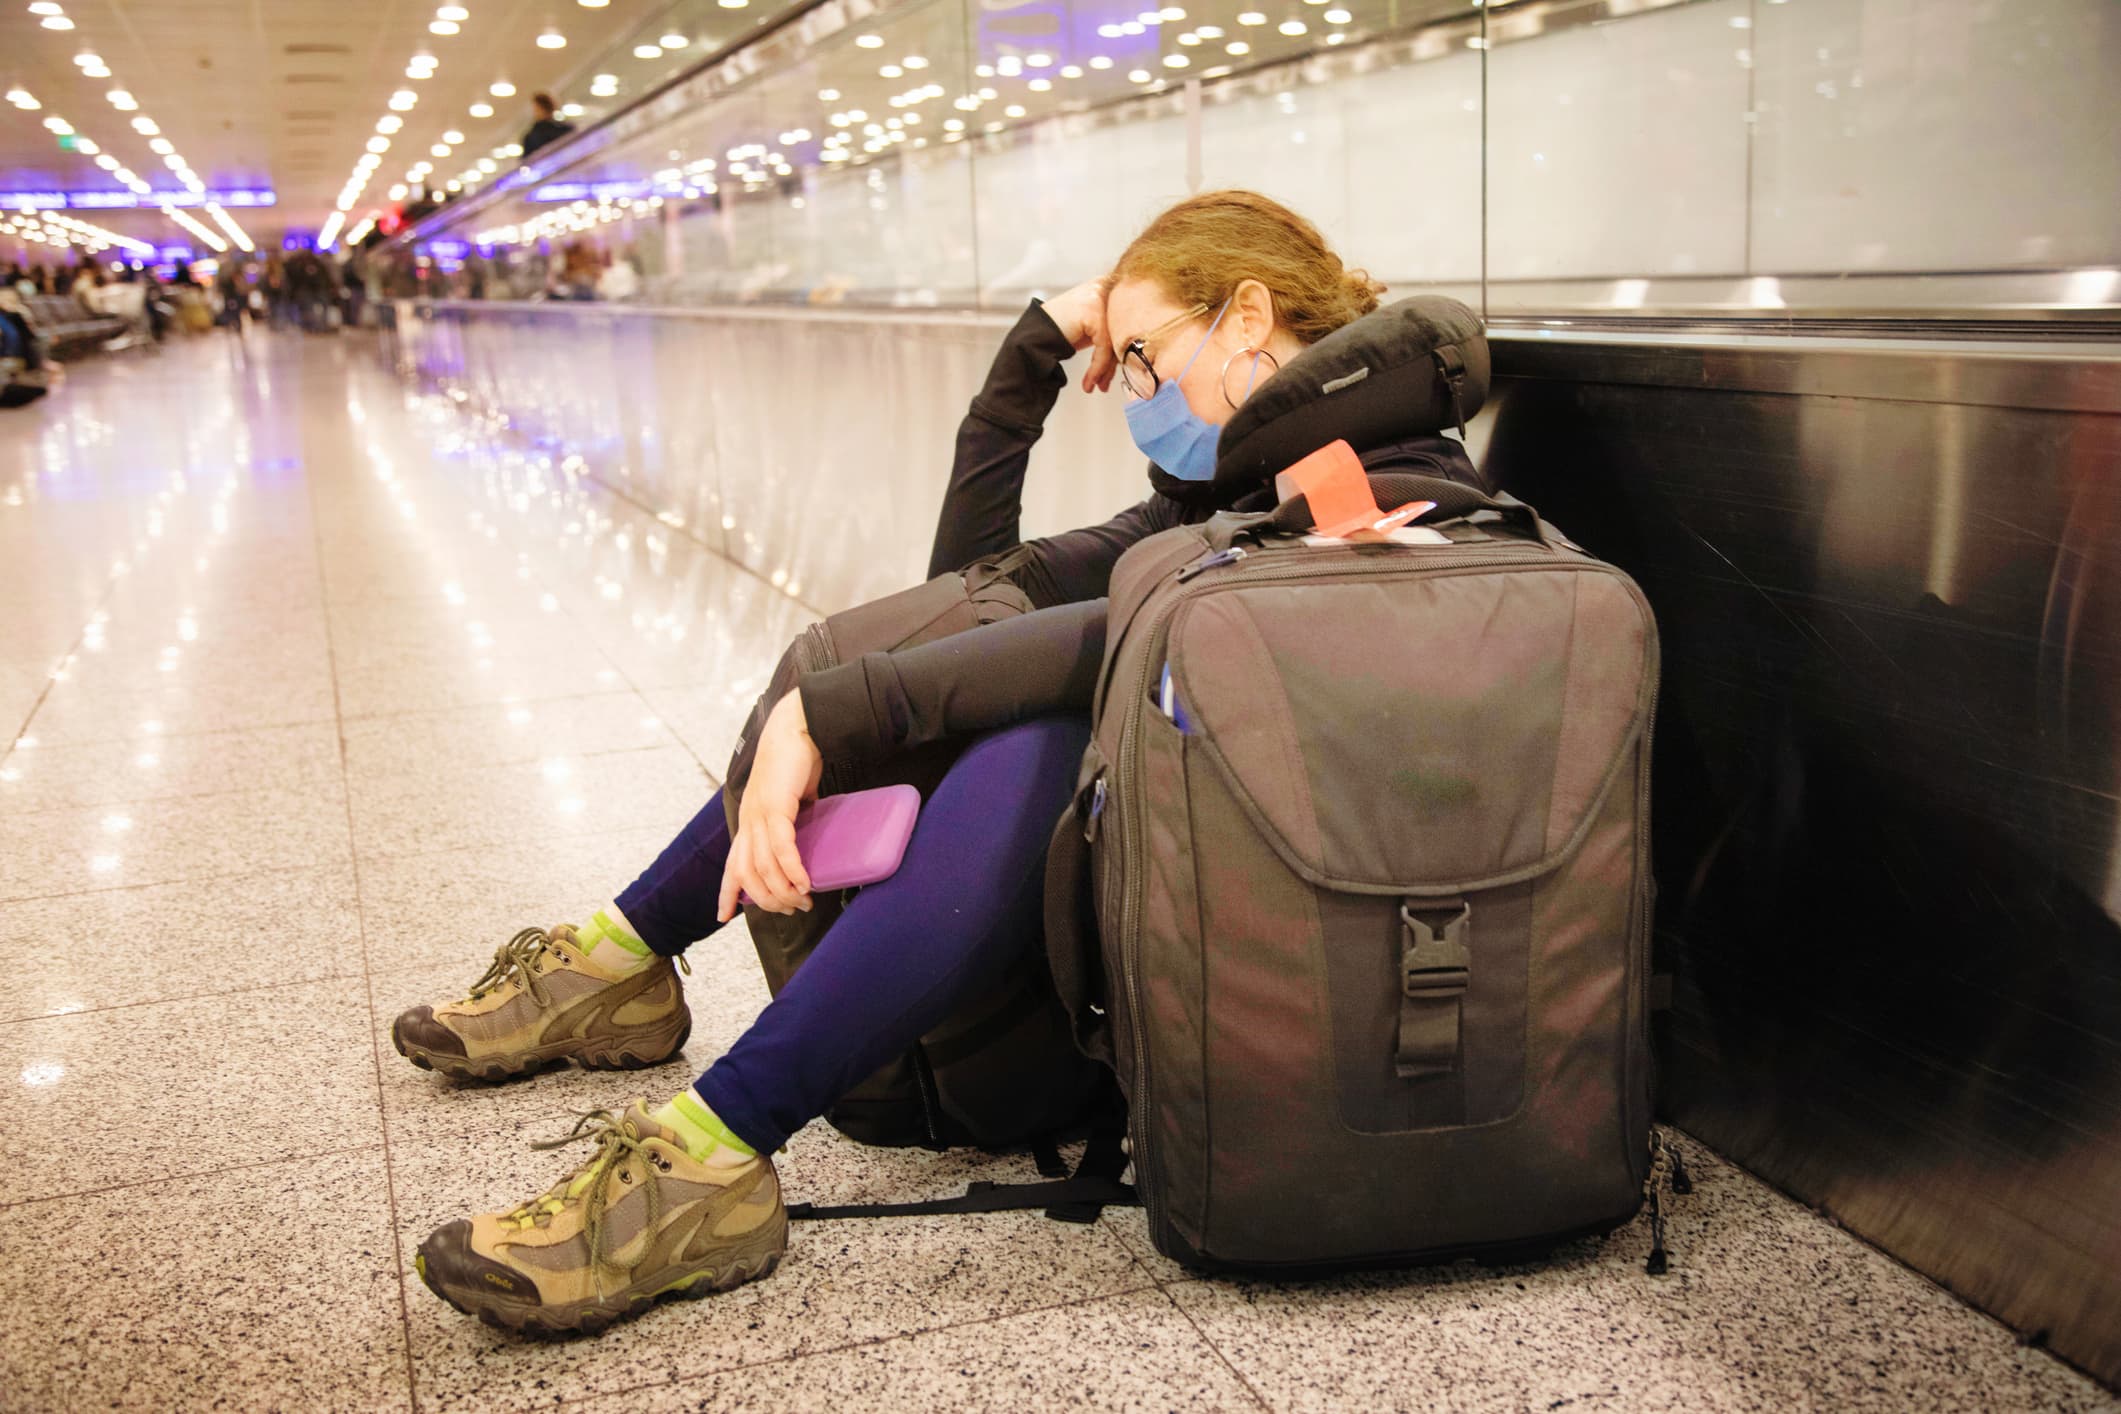 How to insure your trip amid airline cancellations